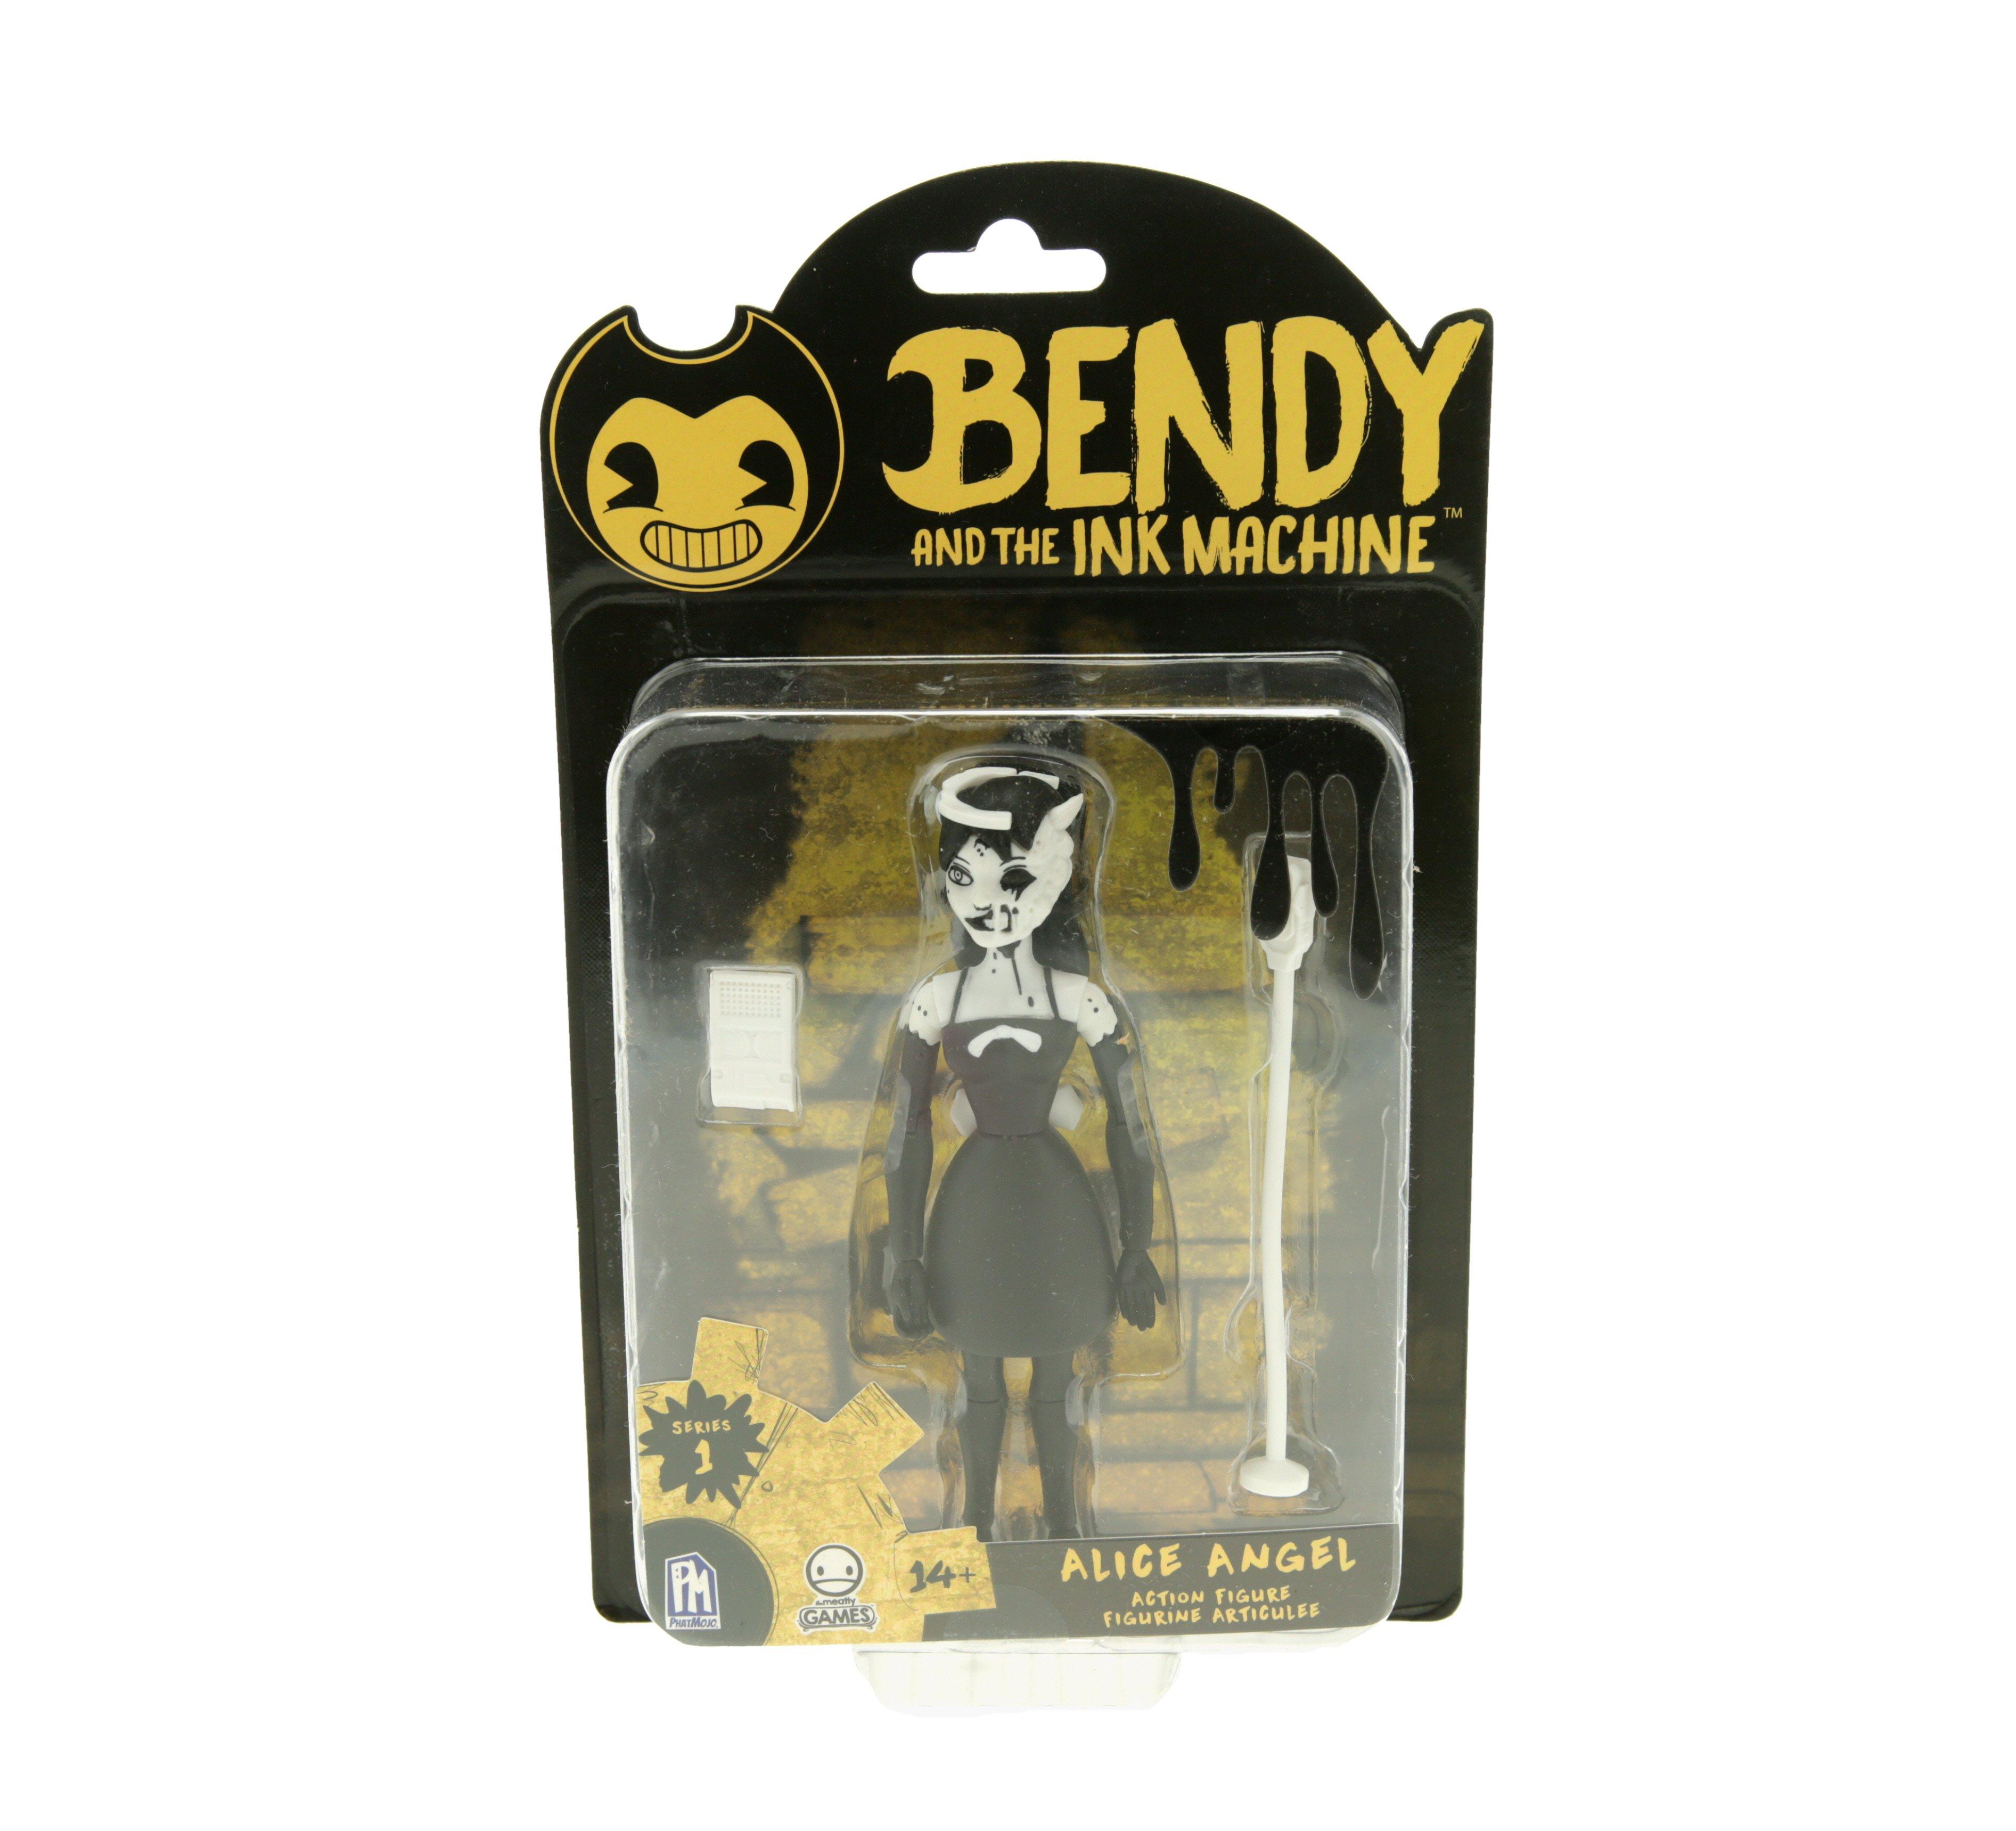 ALICE THE ANGEL Bendy & the Ink Machine Series 1 Action Figure NEW